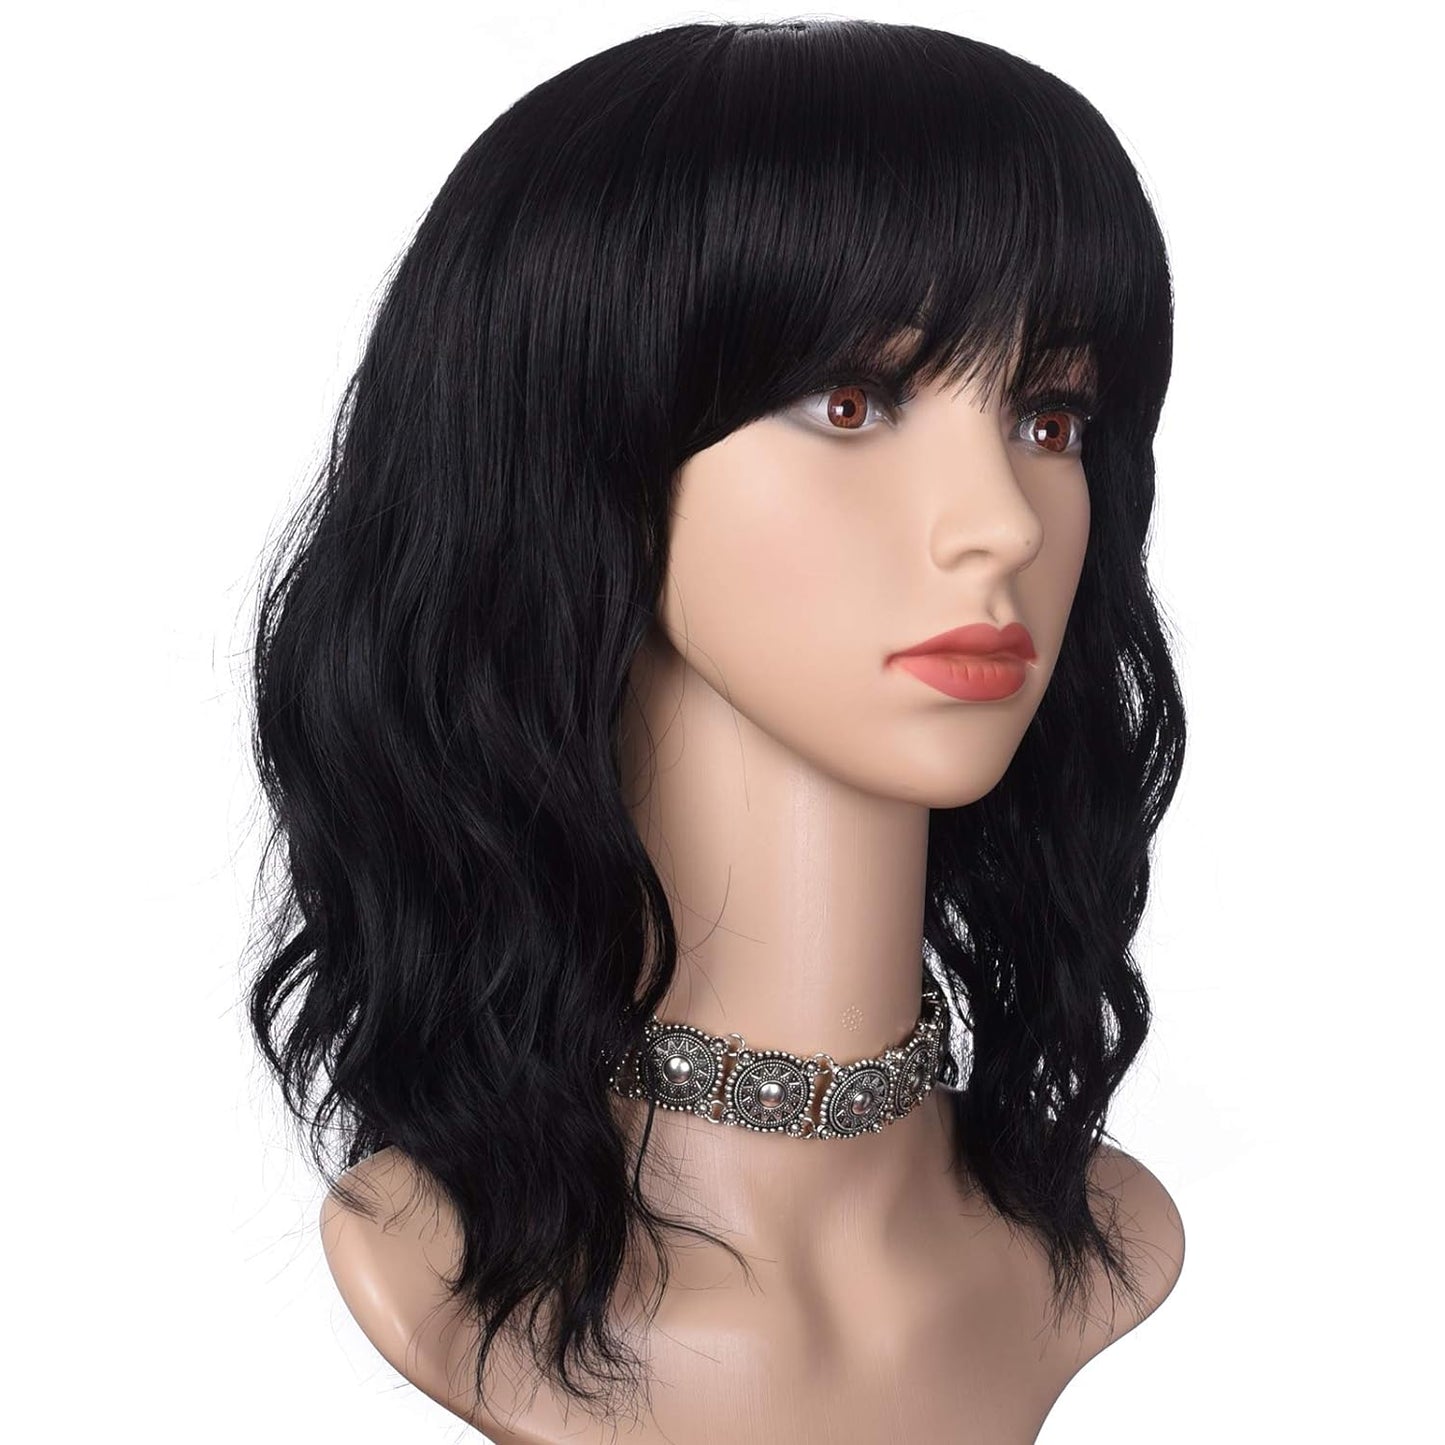 Short Black Wavy Bob Wig with Bangs for Women 16 Inches Natural Synthetic Hair Wavy Wigs